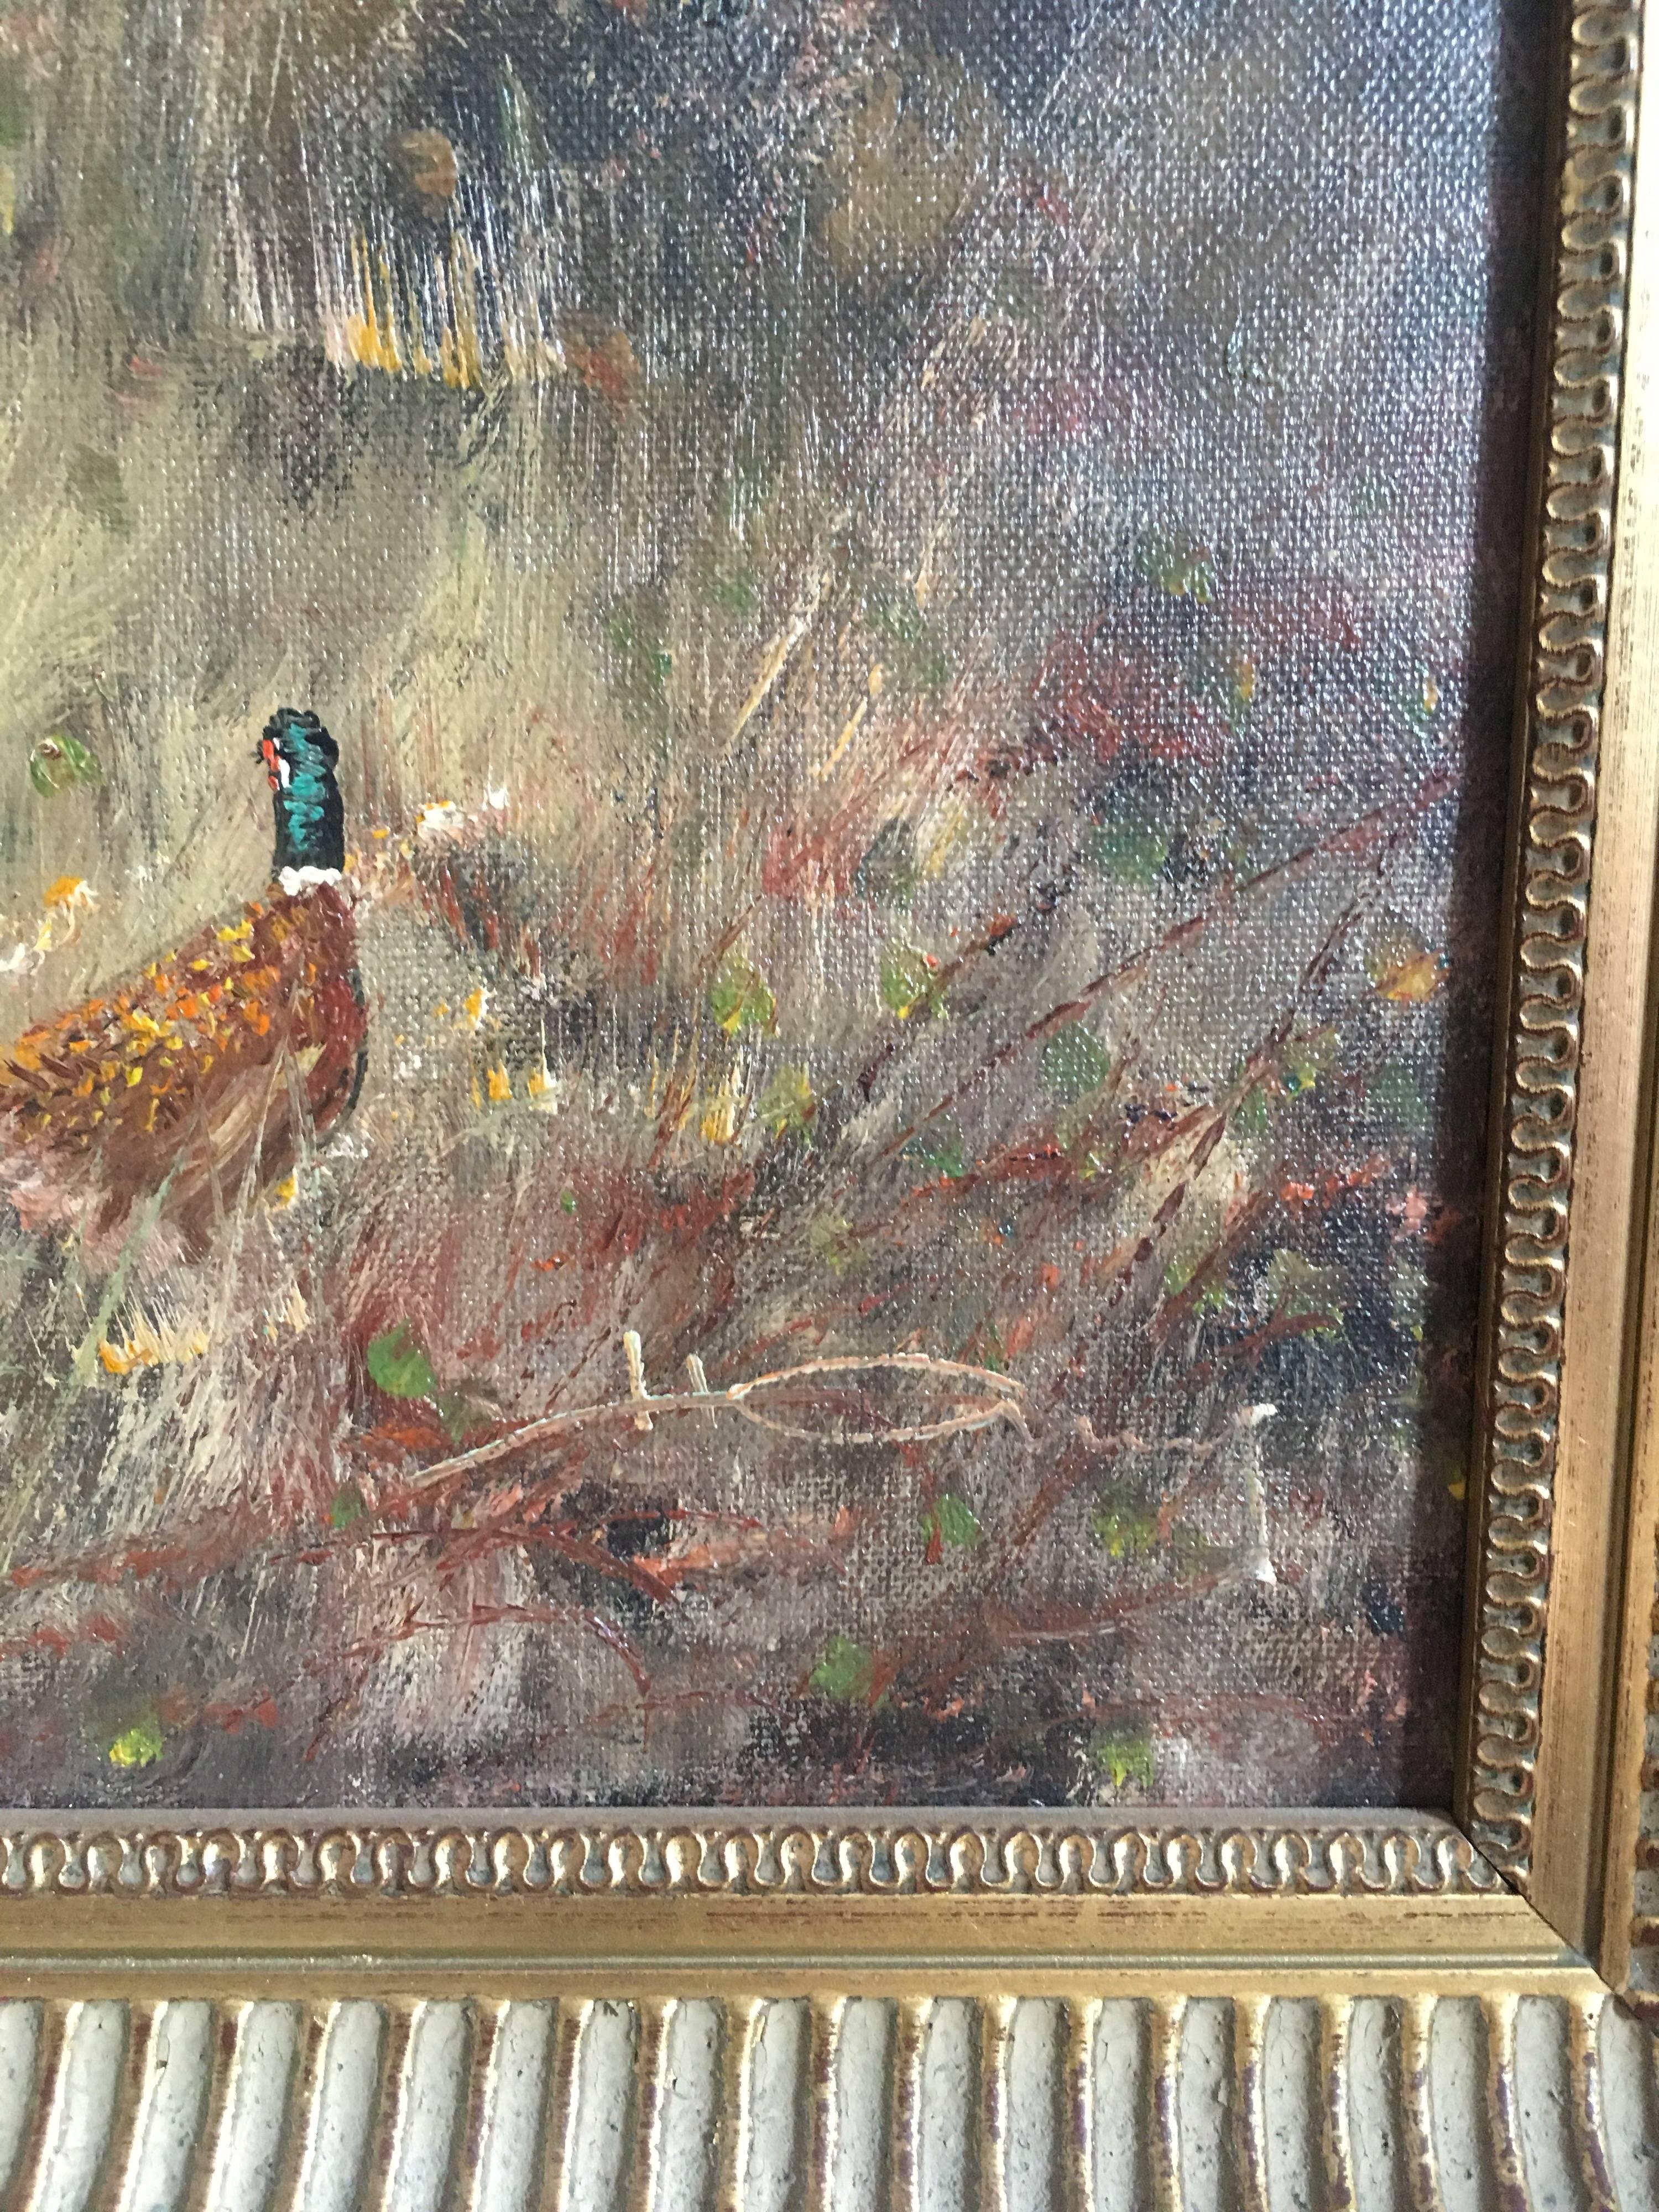 Pheasants In British Countryside, Oil Painting, Signed - Gray Landscape Painting by Unknown